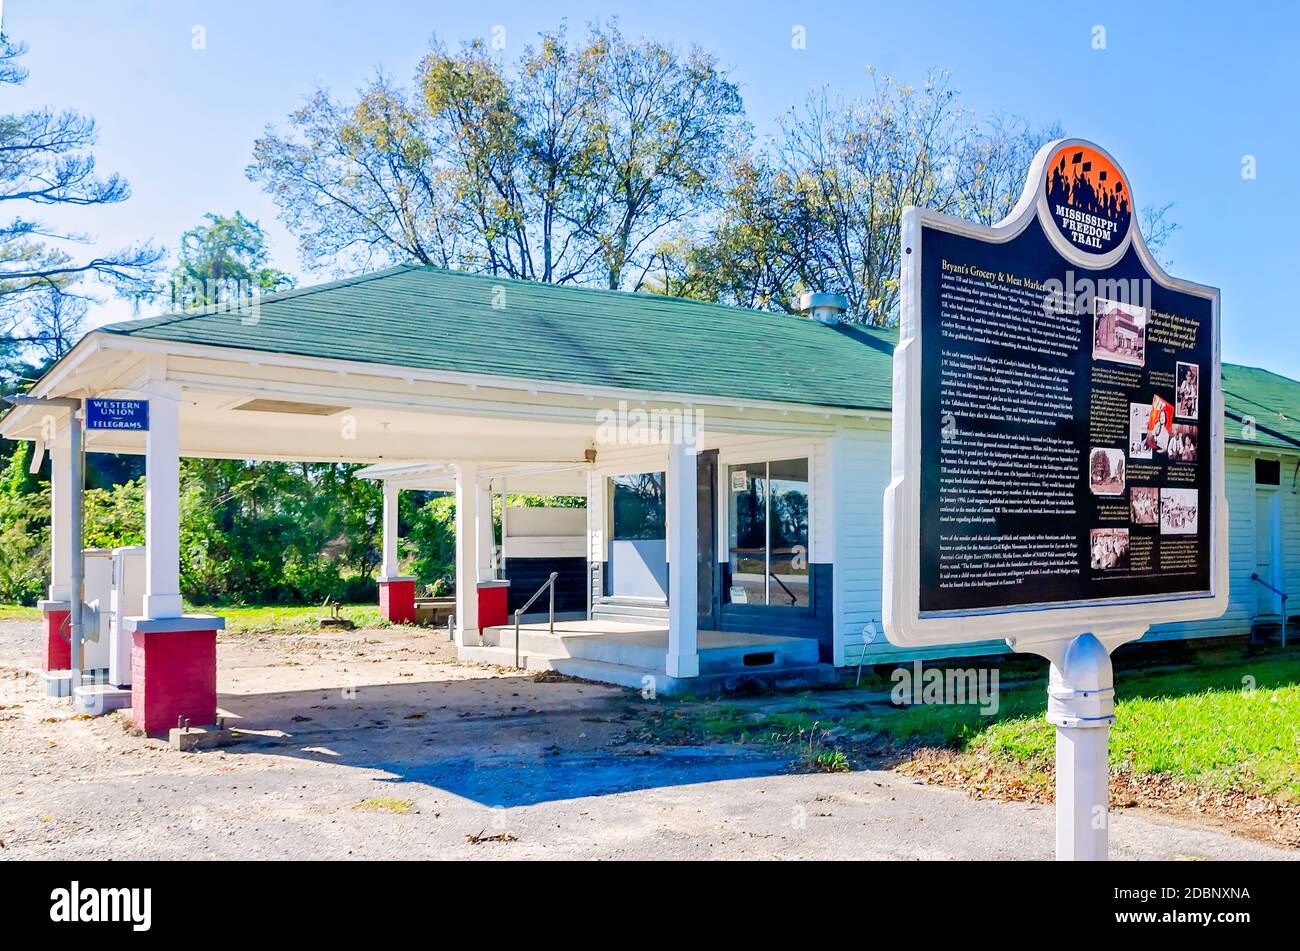 A historic plaque for Emmitt Till stands alongside Bryant’s Grocery (not pictured) and Ben Roy’s Service Station in Greenwood, Missississippi. Stock Photo